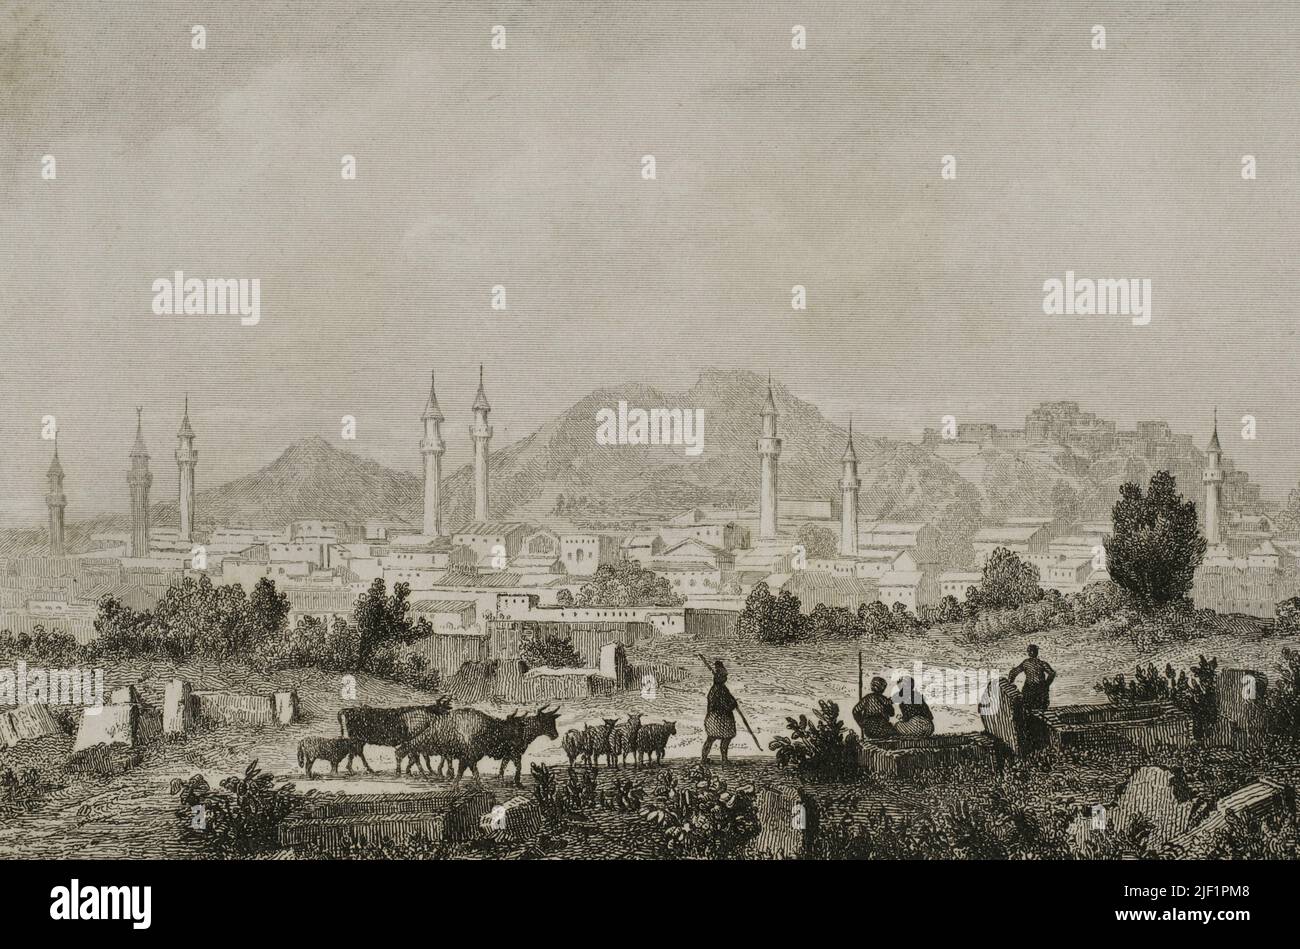 Turkey. Angora (currently Ankara). Panoramic view of the city. Engraving drawn by Préaux. Engraved by Alès. Lemaitre direxit. 'Panorama Universal. Historia de Armenia', 1838. Stock Photo